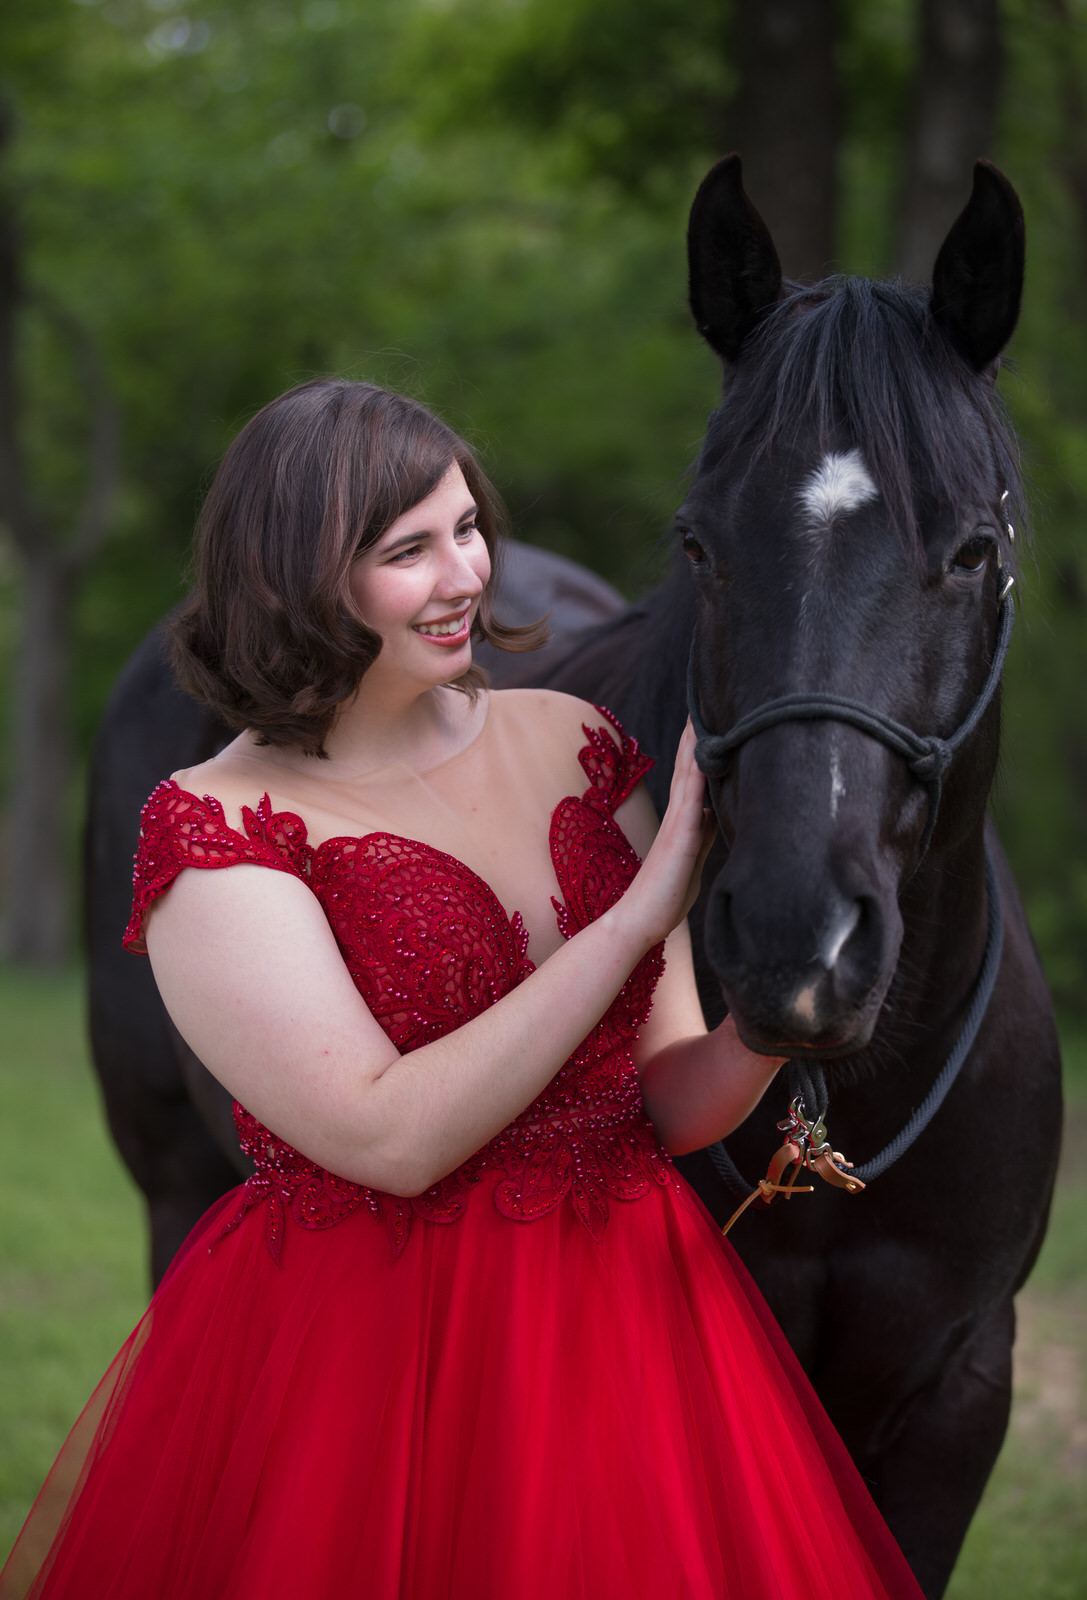 Girl in red dress with black horse portrait session